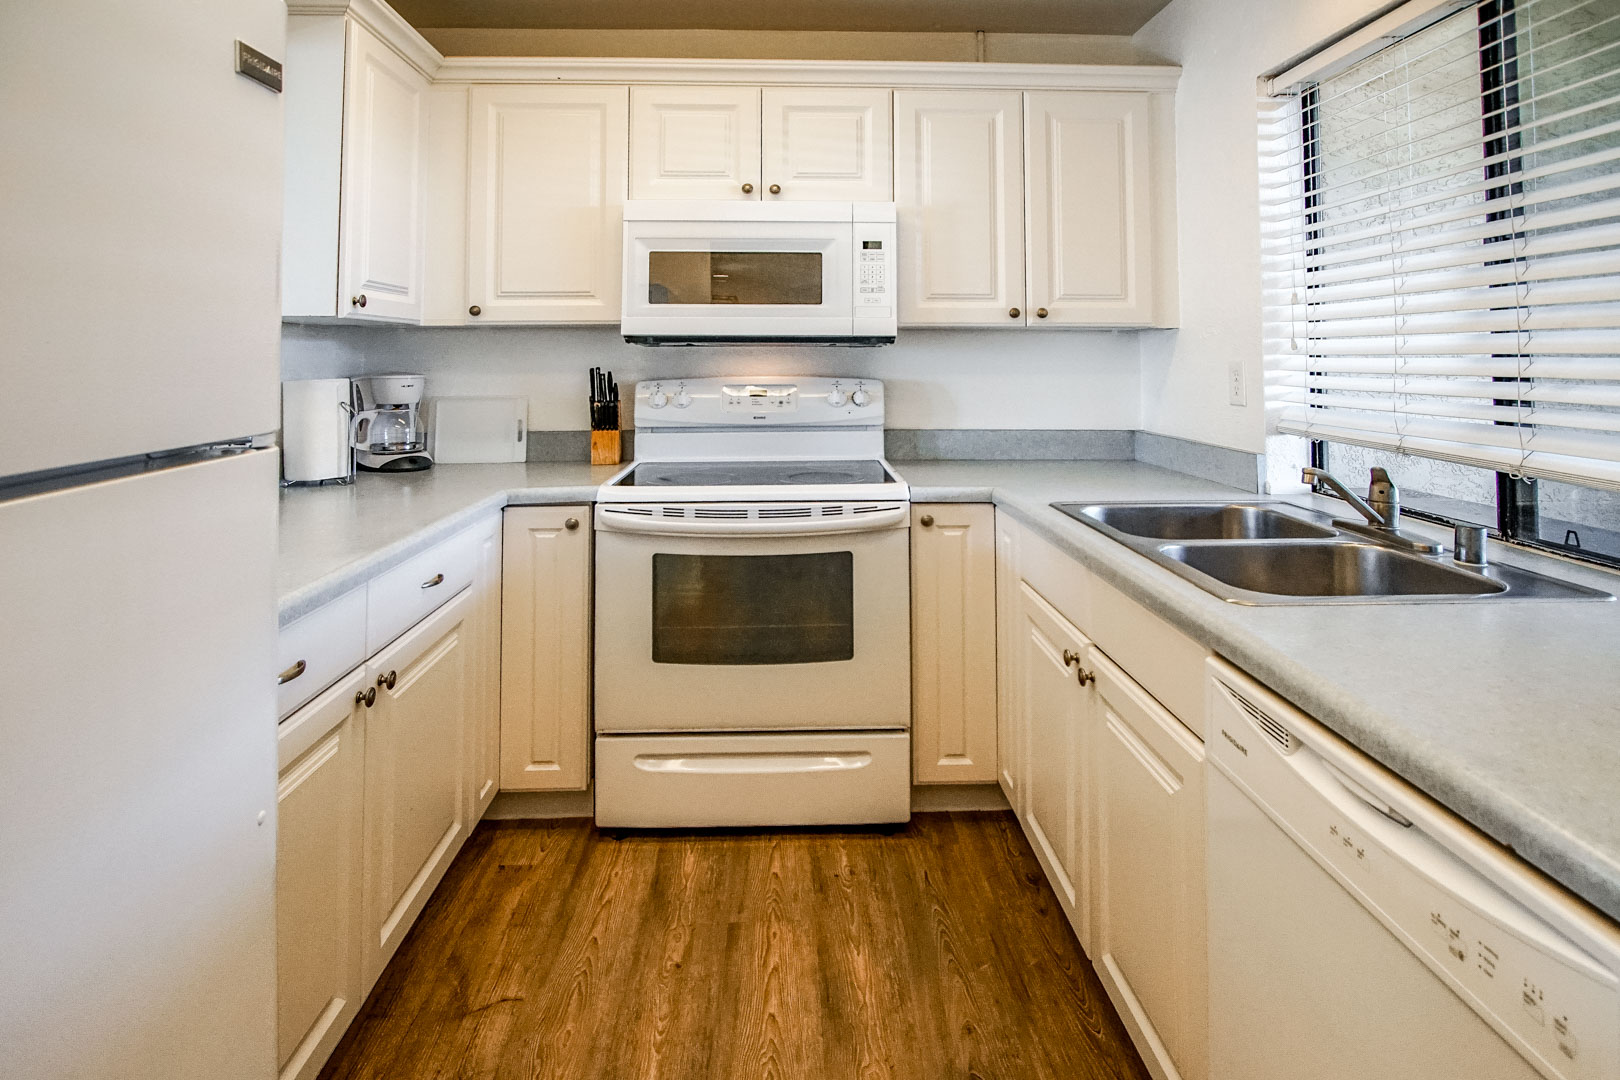 A spacious fully equipped kitchen at VRI's See the Sea in San Diego, CA.